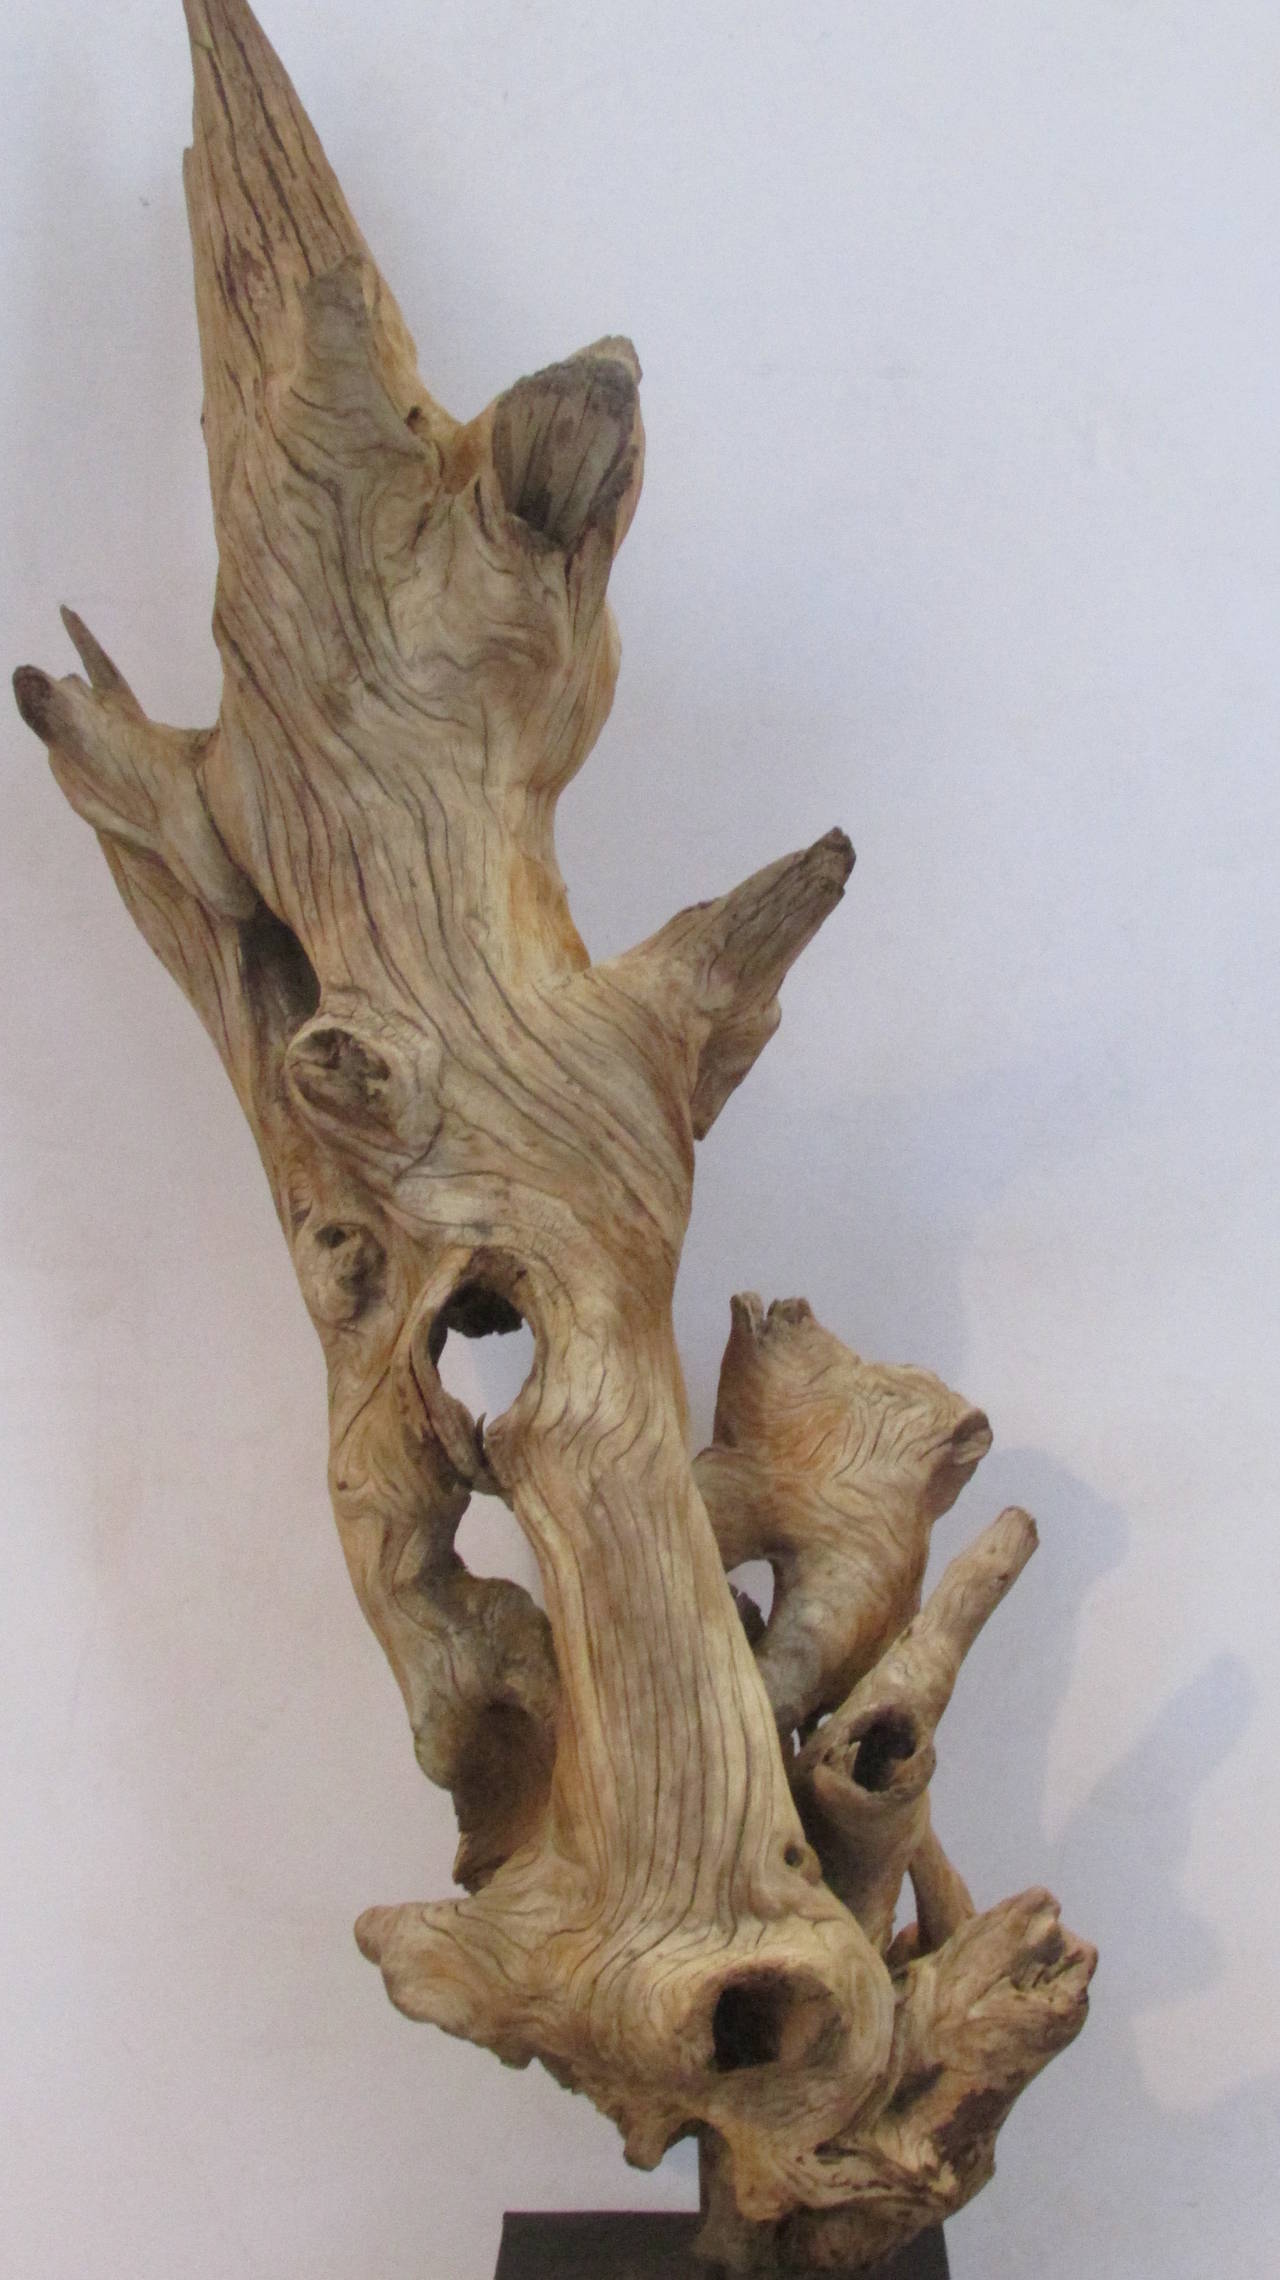 A large-scale ancient looking old driftwood formation from Western New York state with beautifully aged bone like color and gnarled surface, mounted on a contemporary black iron stand as organic modern art sculpture.